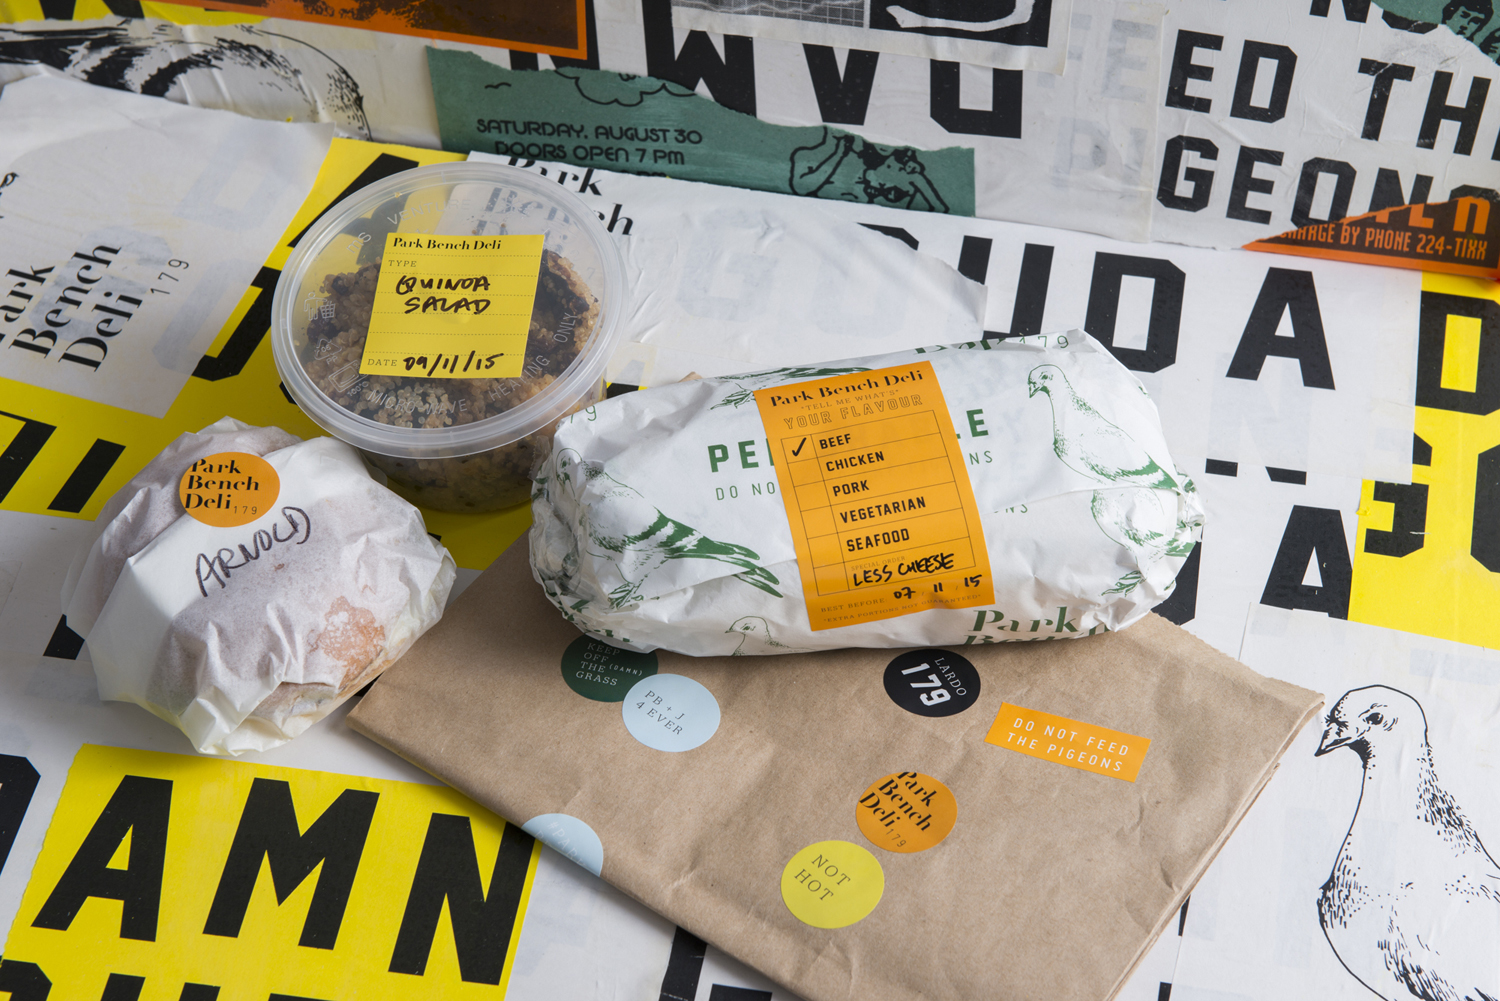 Brand identity, print and packaging by Foreign Policy for Singapore's Park Bench Deli